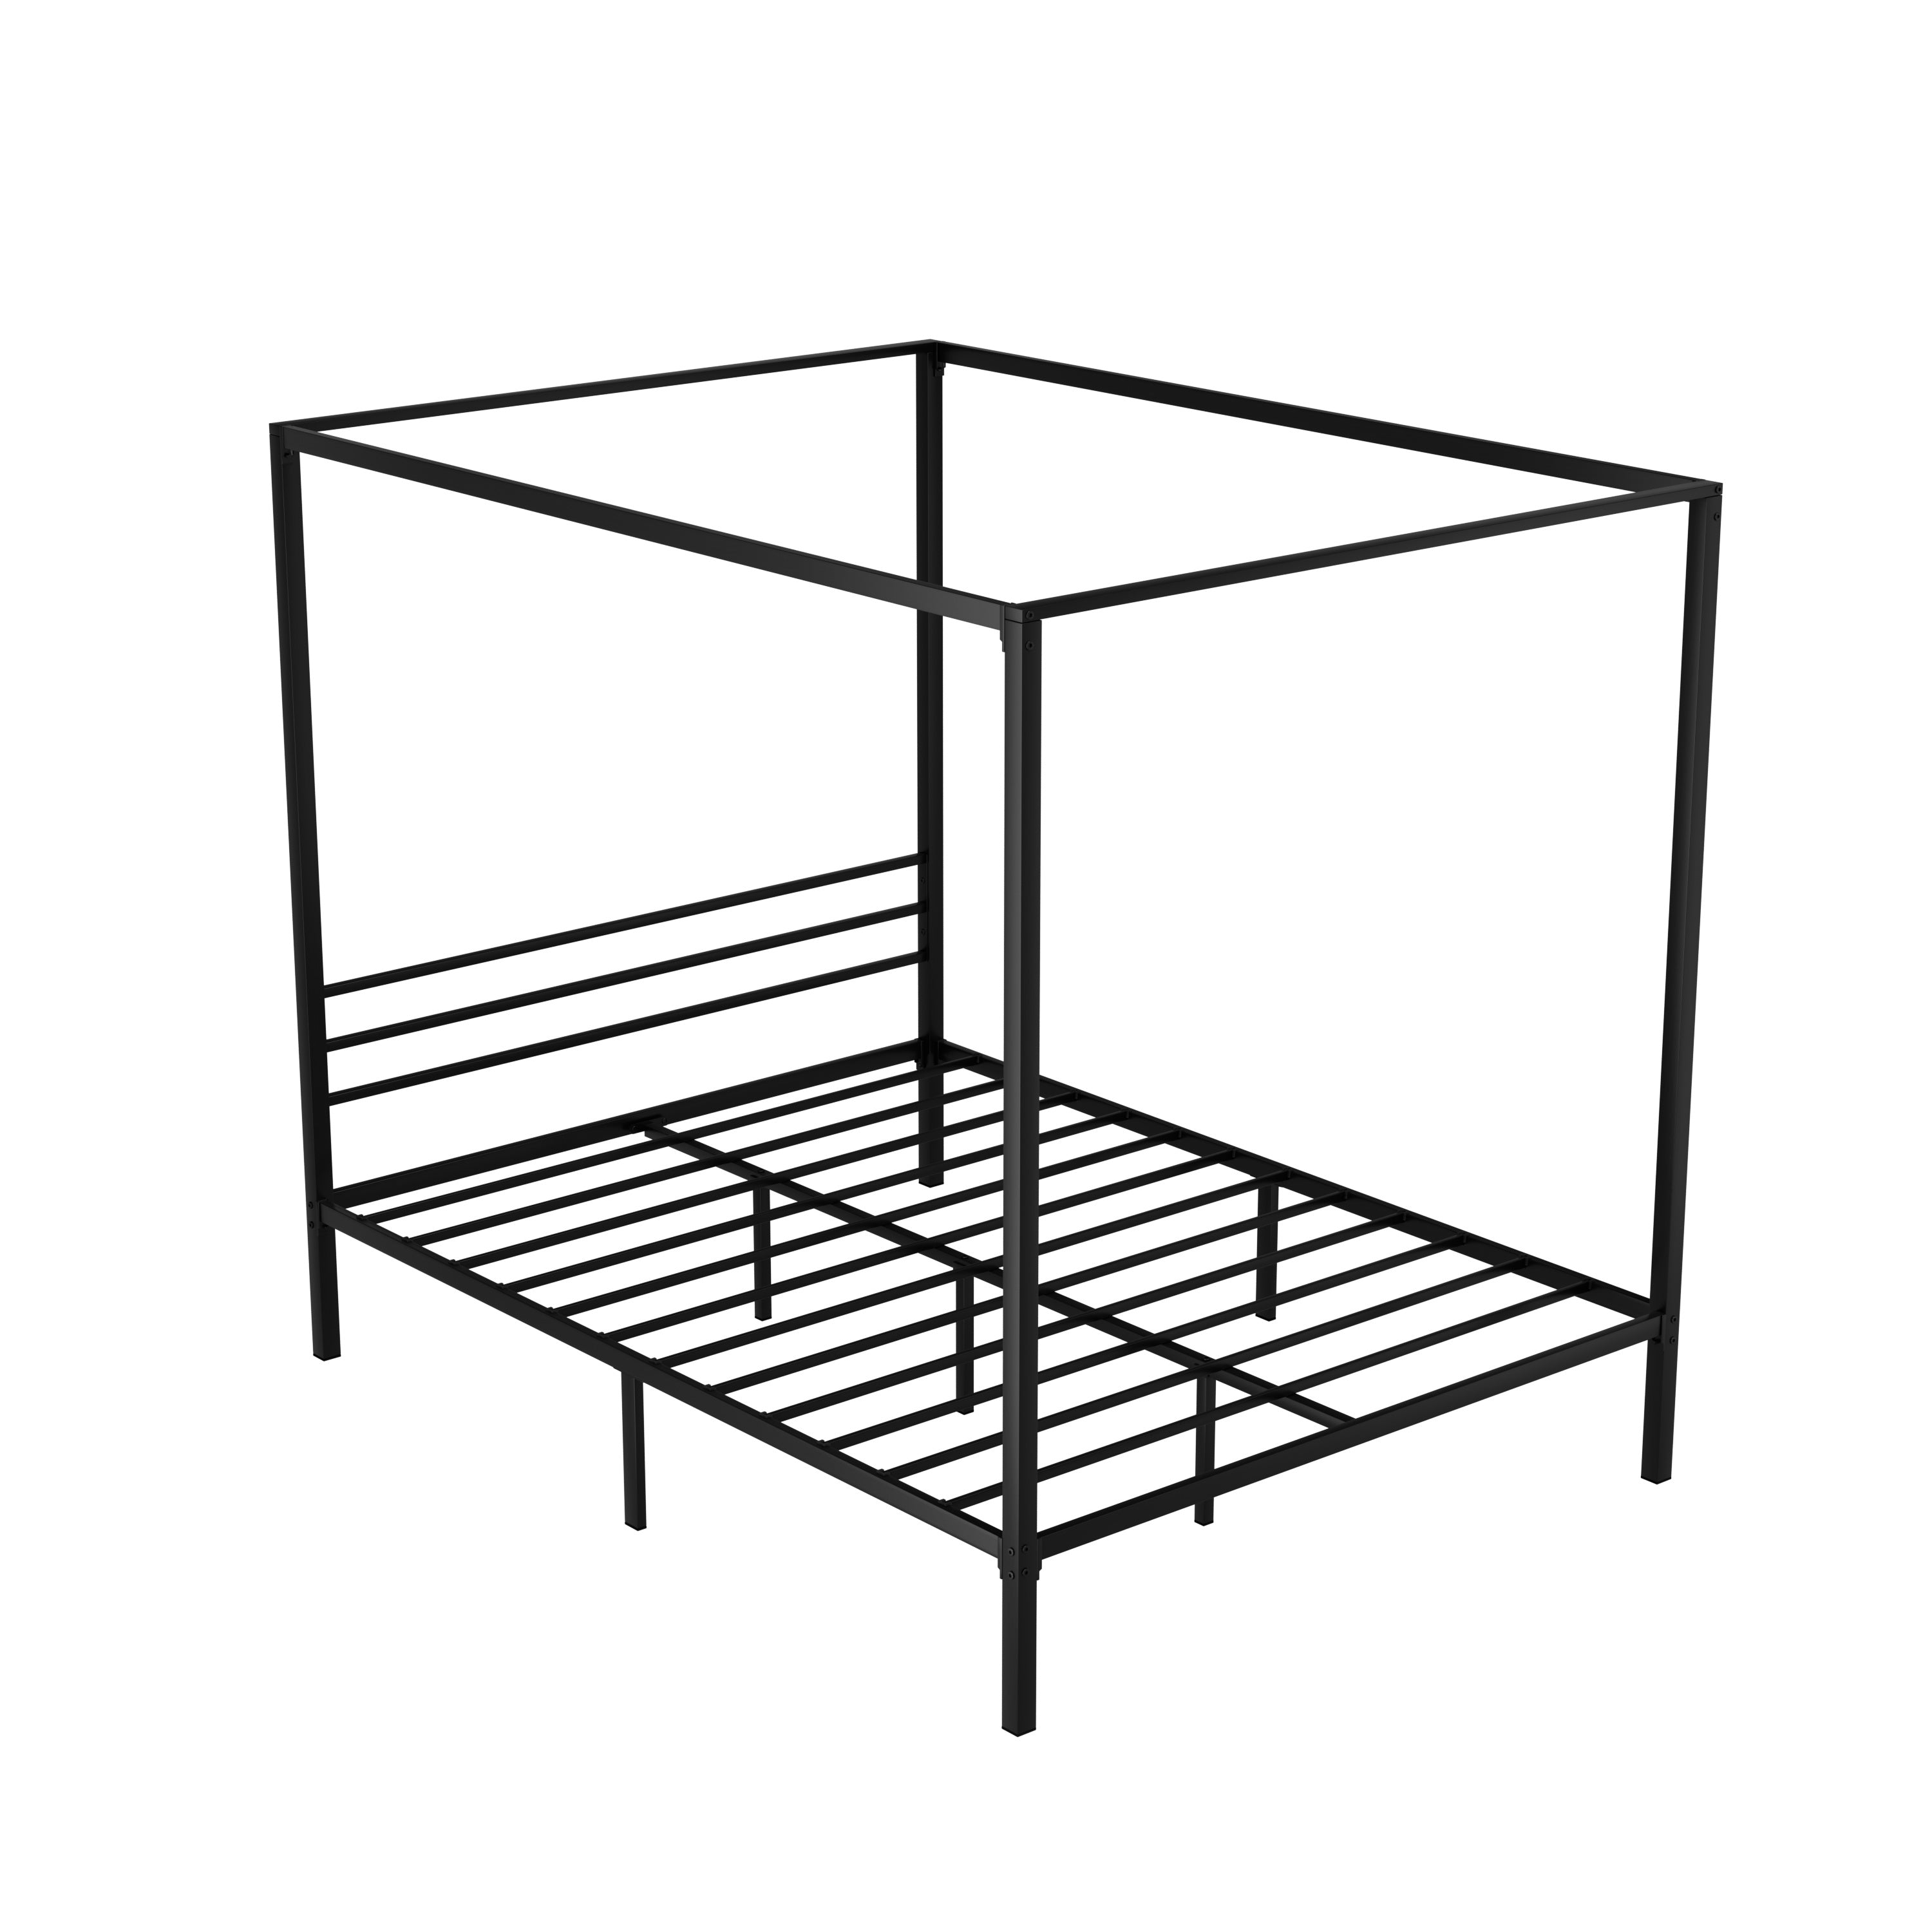 Double/Queen Metal Four-Poster Bed Frame - Black